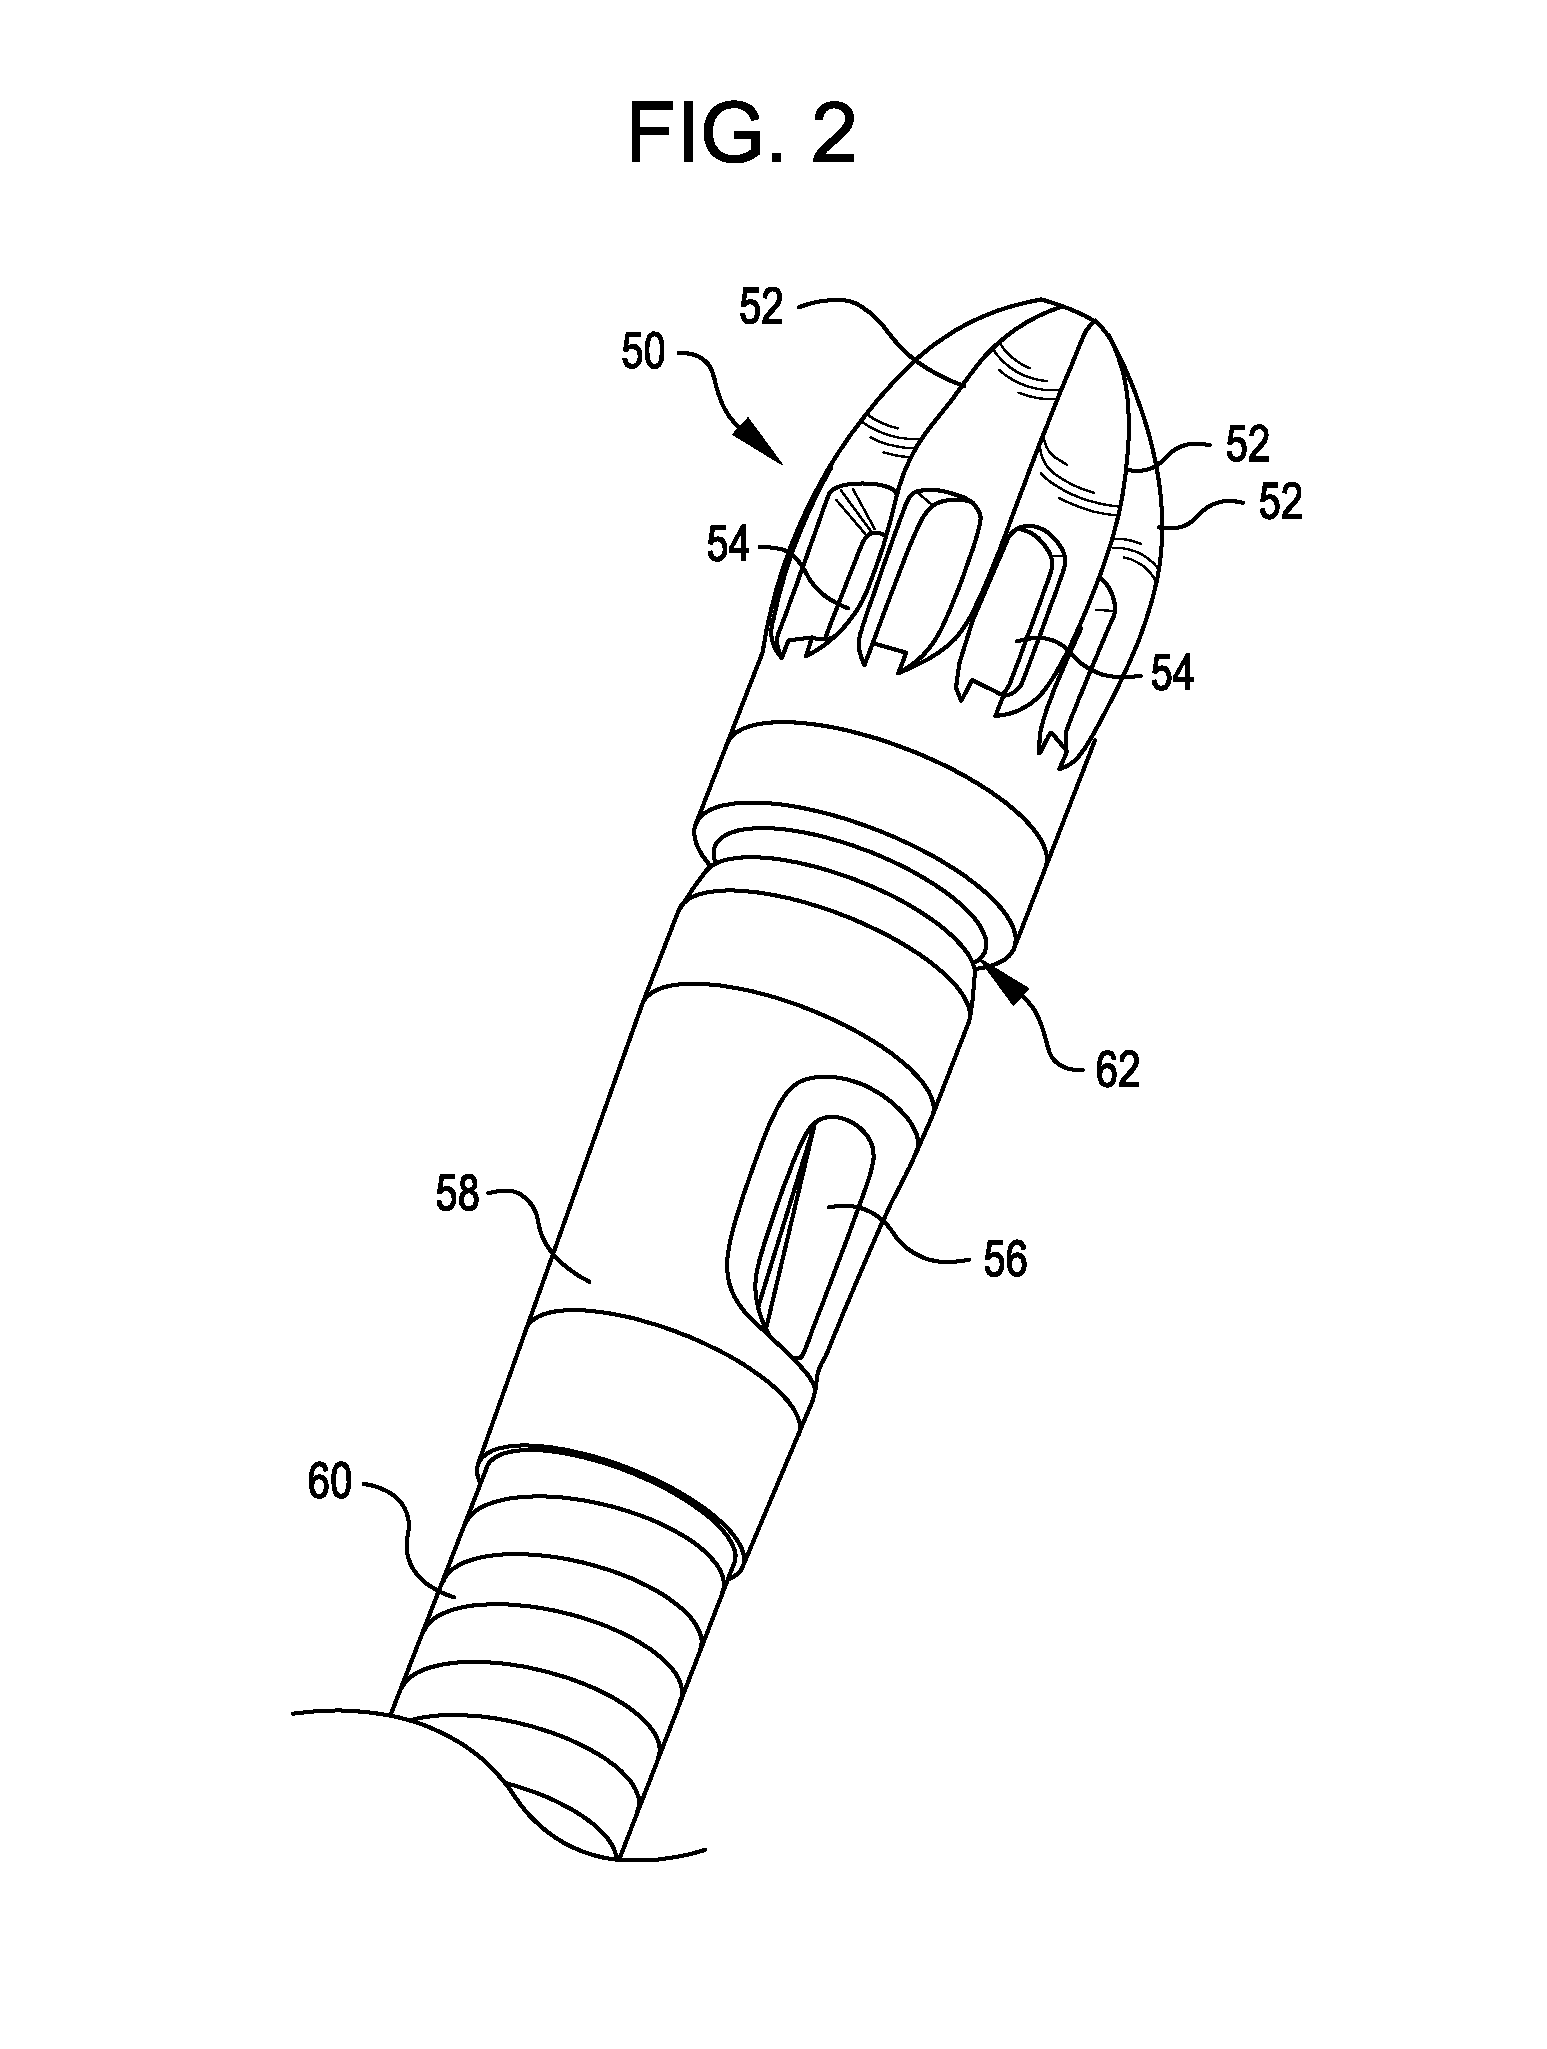 Interventional catheters incorporating aspiration and/or infusion systems